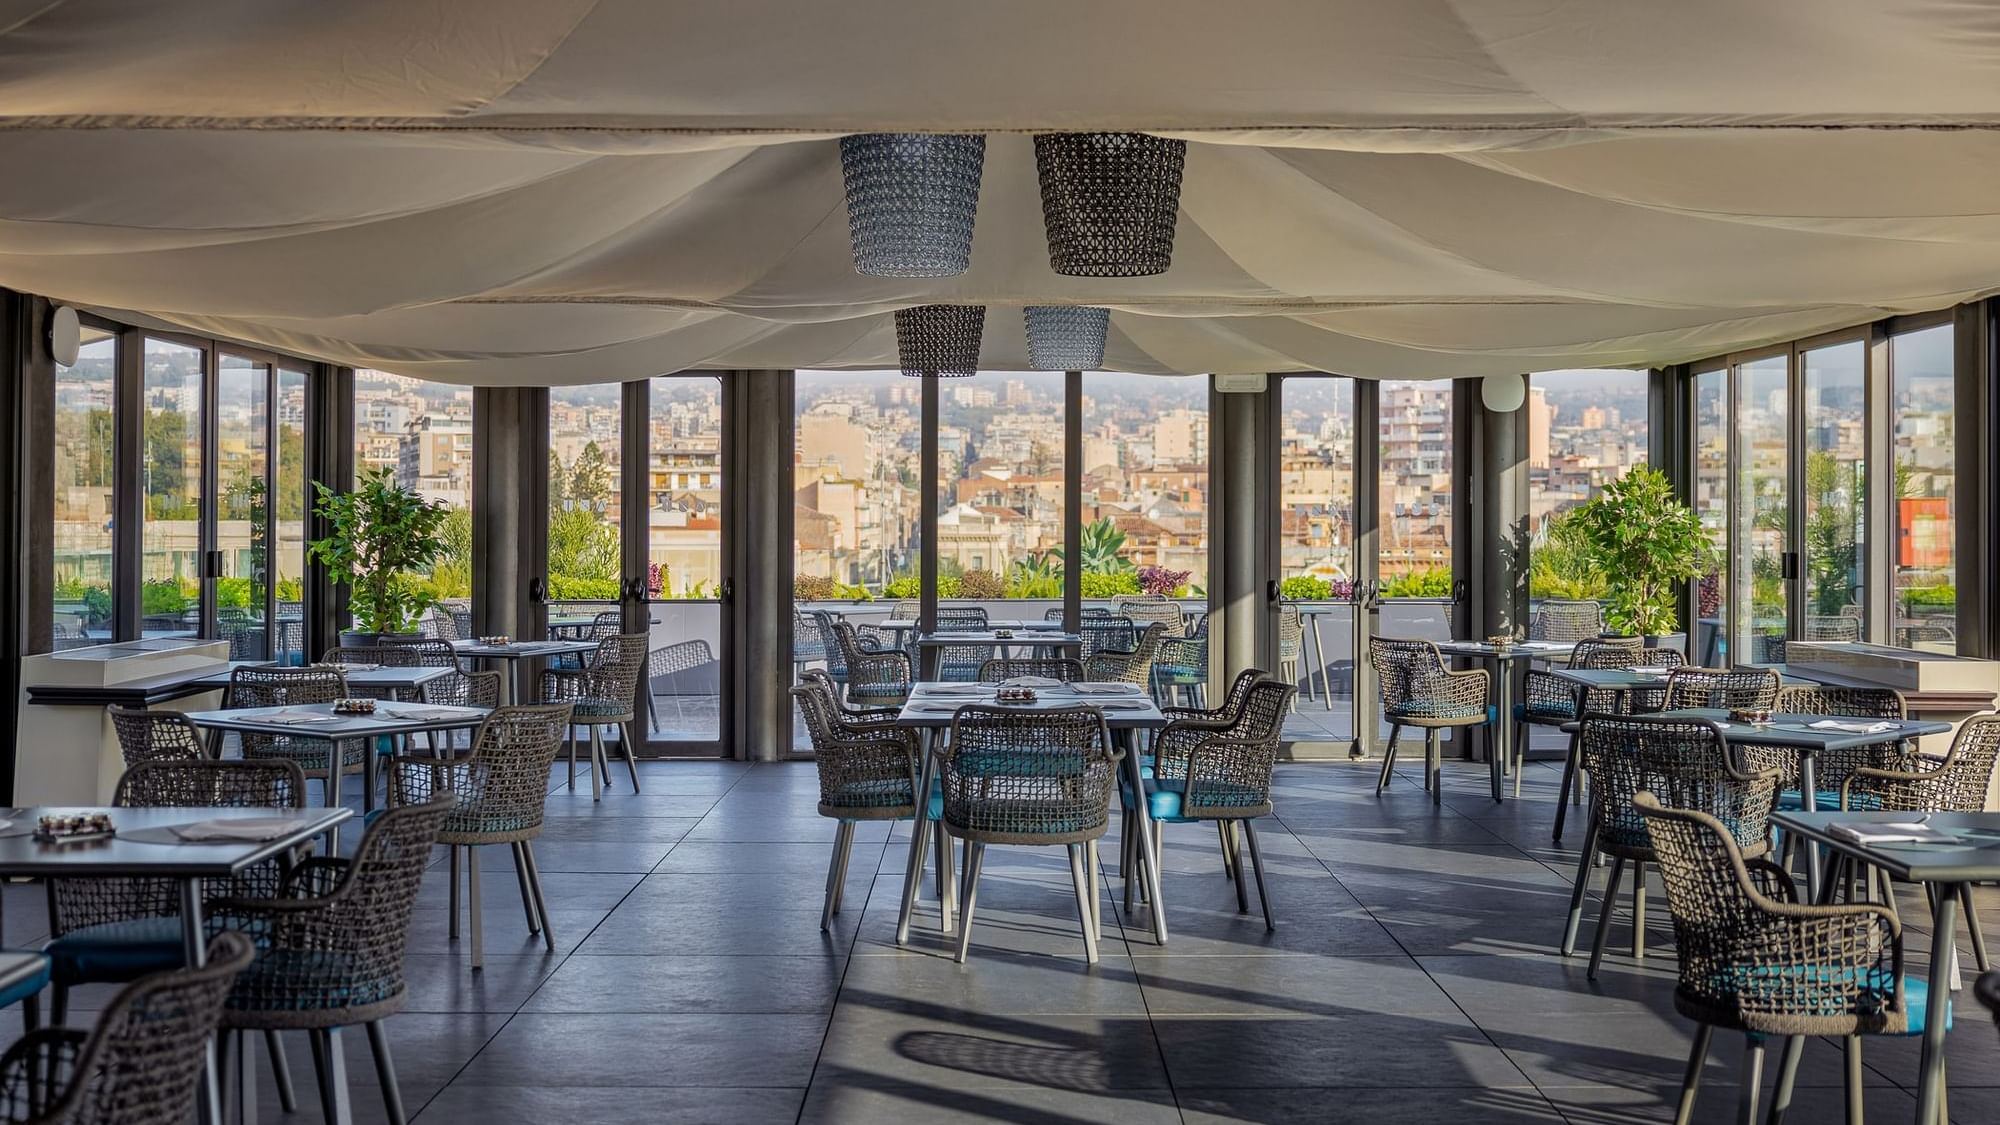 Etnea Roof Bar & Restaurant: Restaurant with rooftop in the heart of Catania